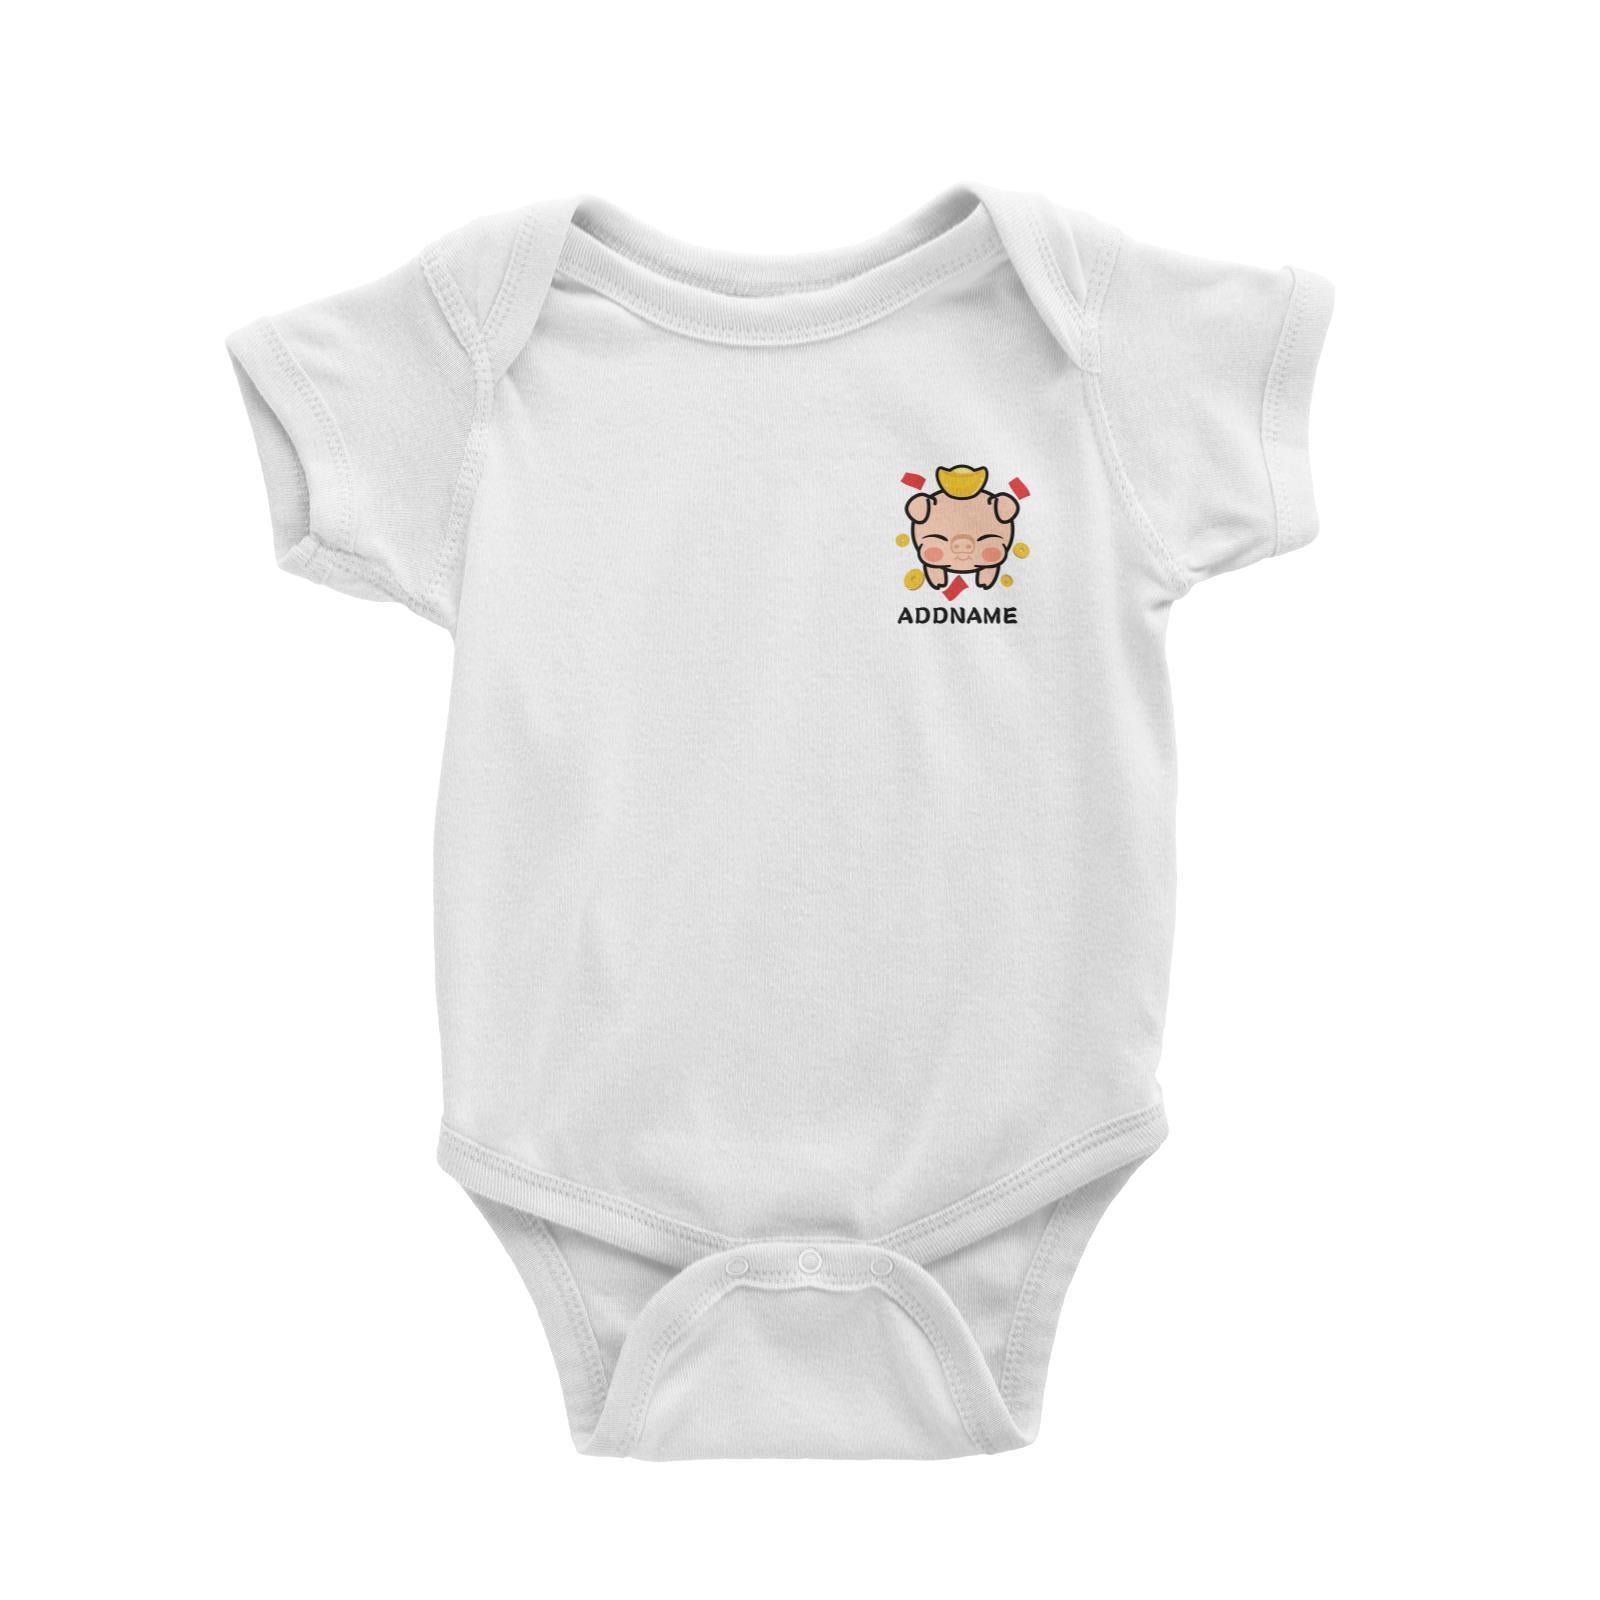 Prosperity Pig Baby Head with Gold Pocket Design Baby Romper